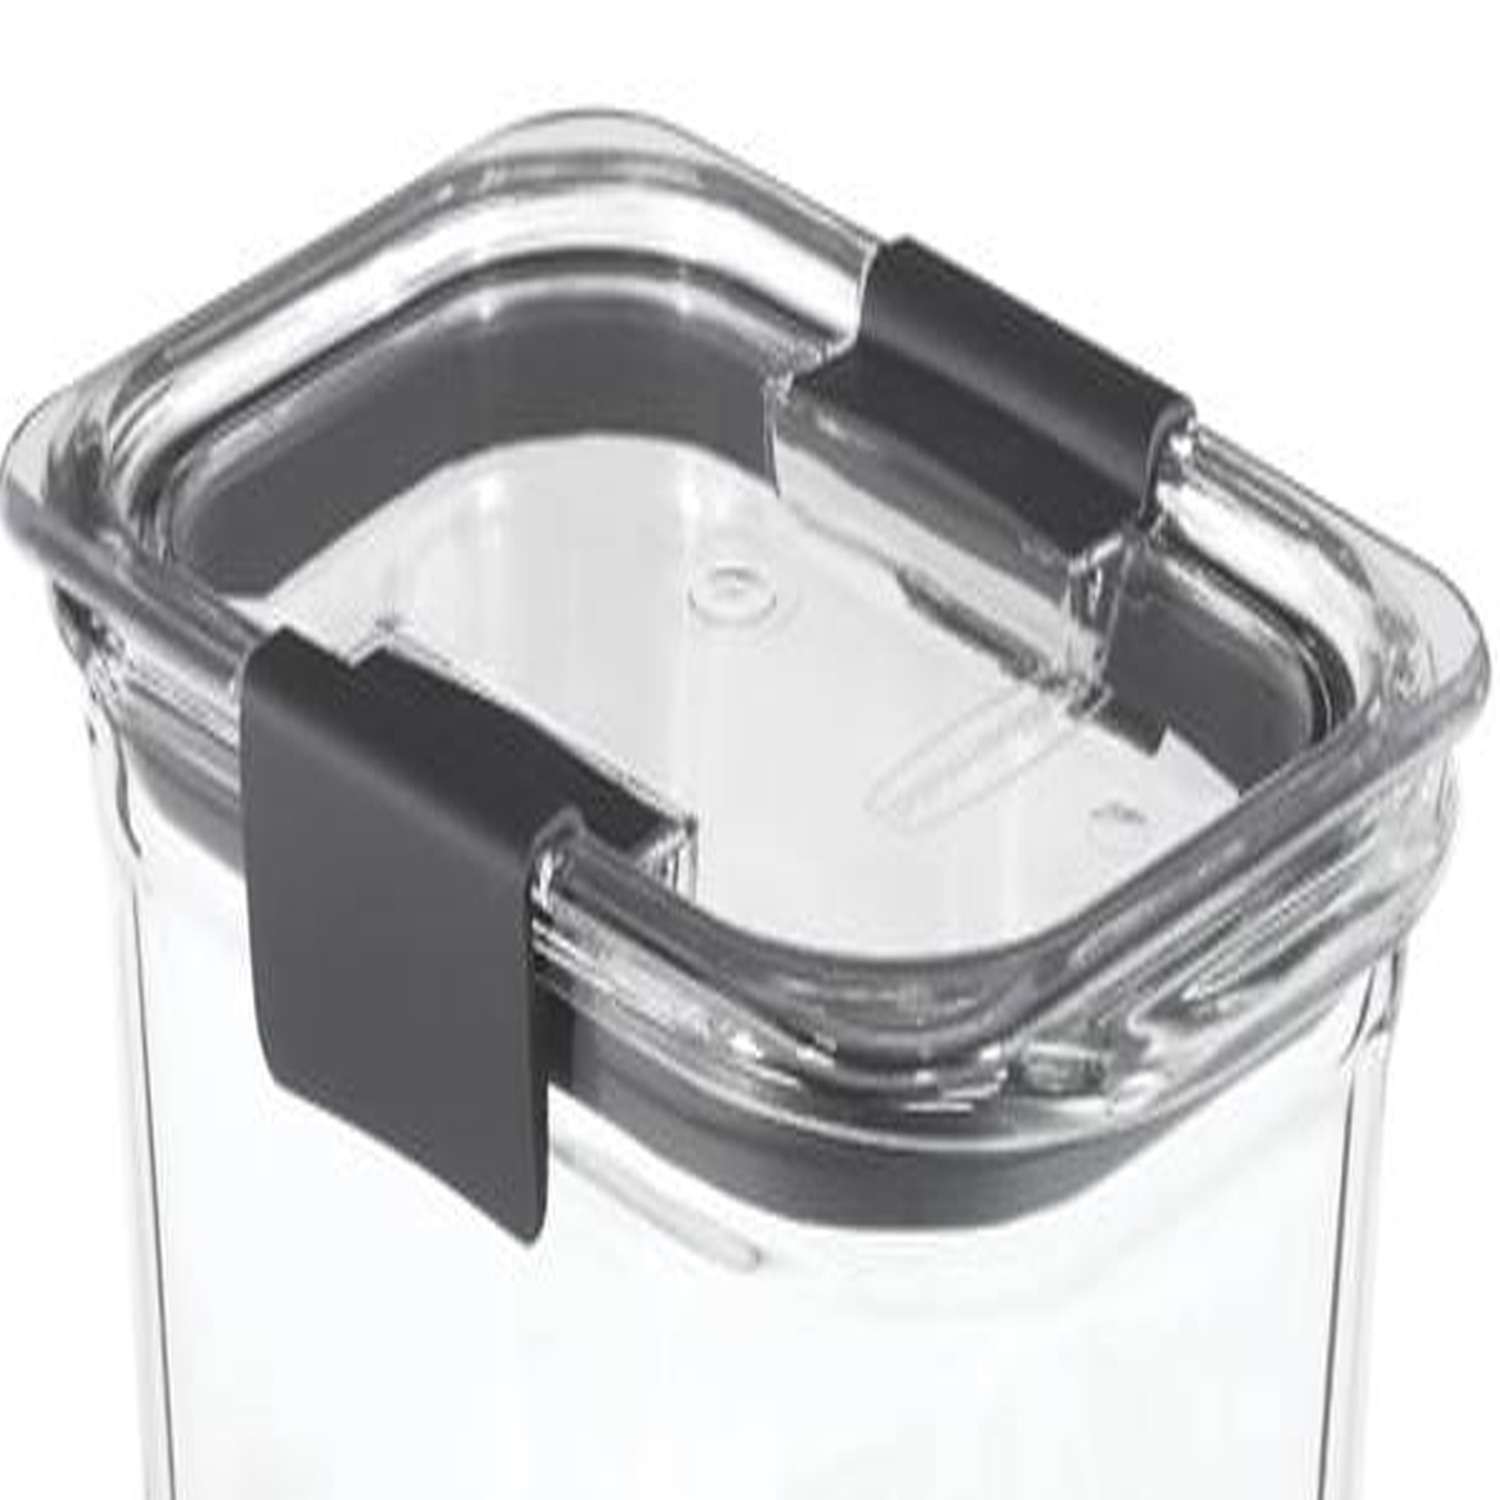 Rubbermaid Brilliance Glass 8 Cup Food Storage Container, Food Storage, Household